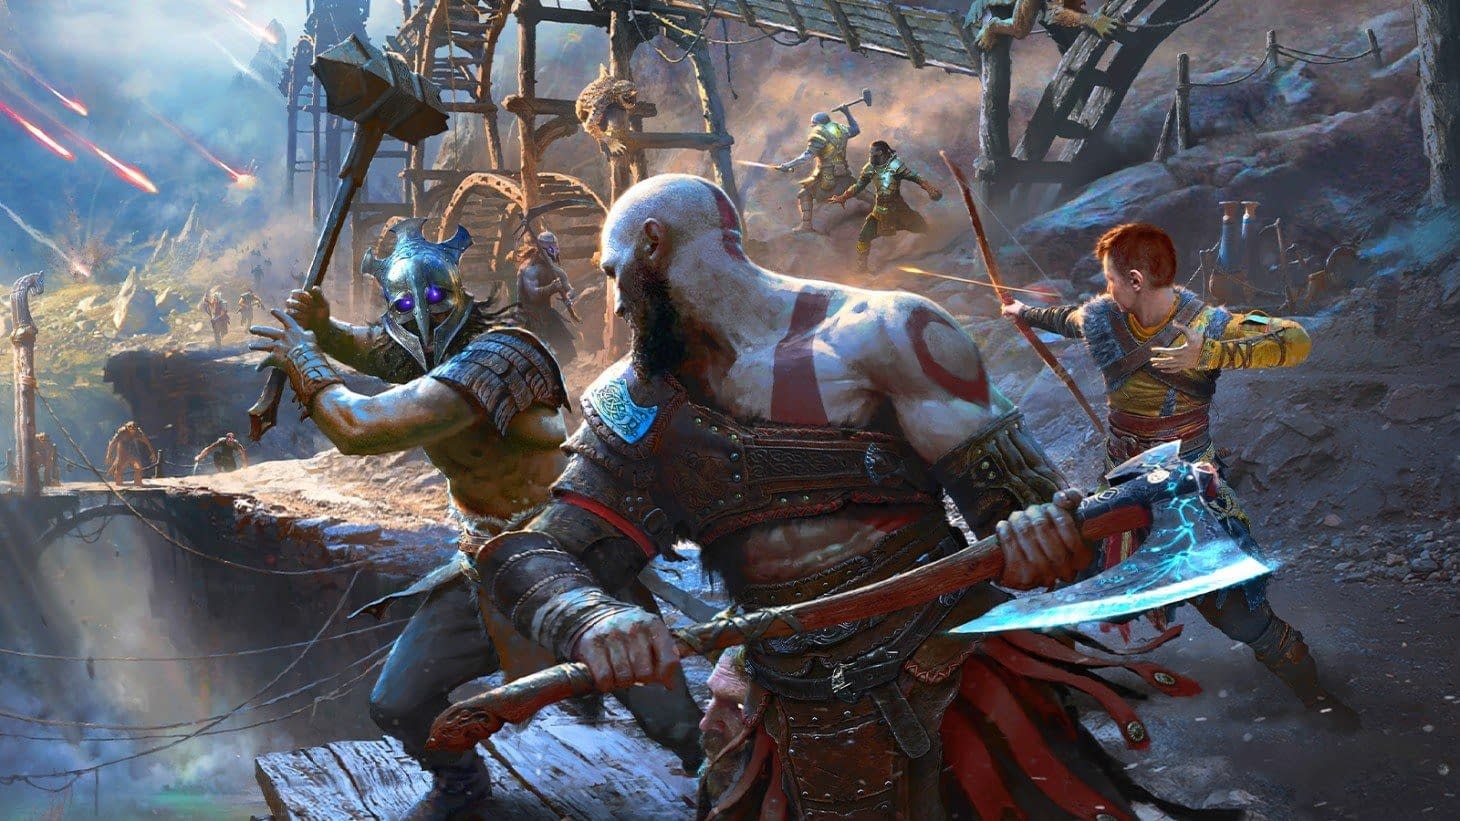 Old God of War Art Director Joined Netflix for a Large Diameter Project